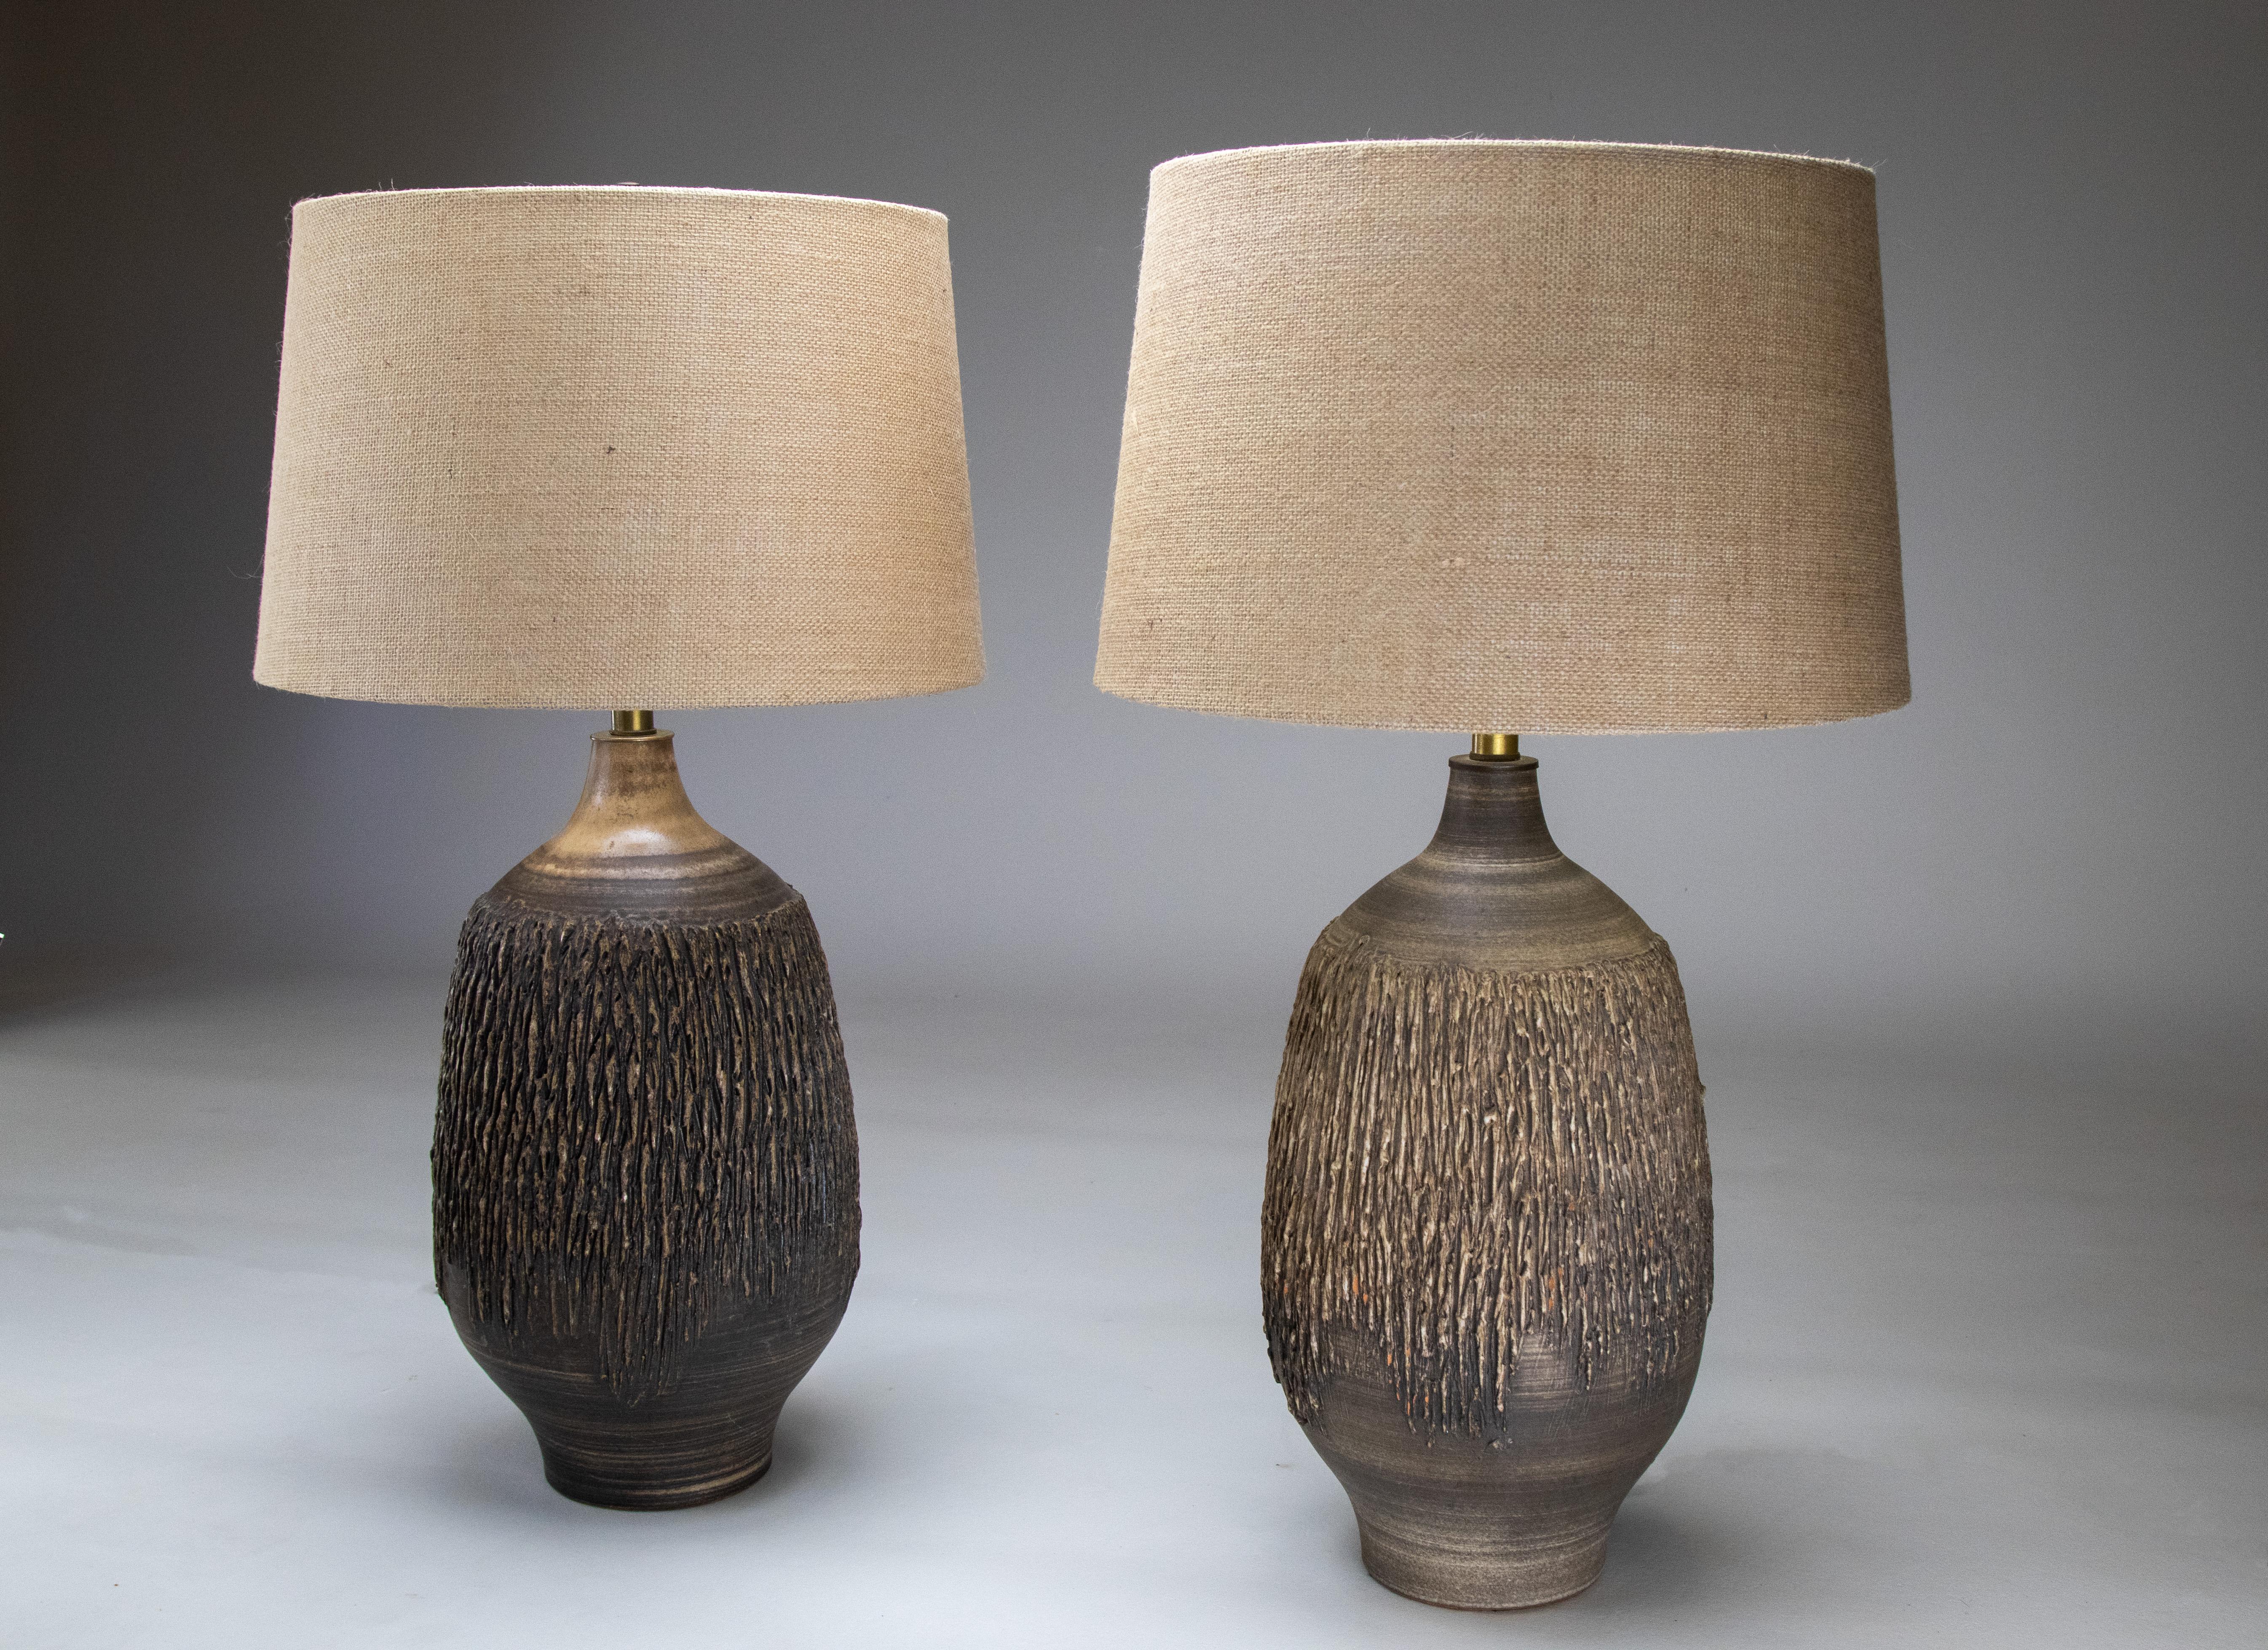 A pair of large scale textured ceramic lamps designed by Lee Rosen and manufactured by Design Technics. This is a mated pair with one lamp having a darker glaze than the other. On opposite sides of a bed or in high light situations it is not that